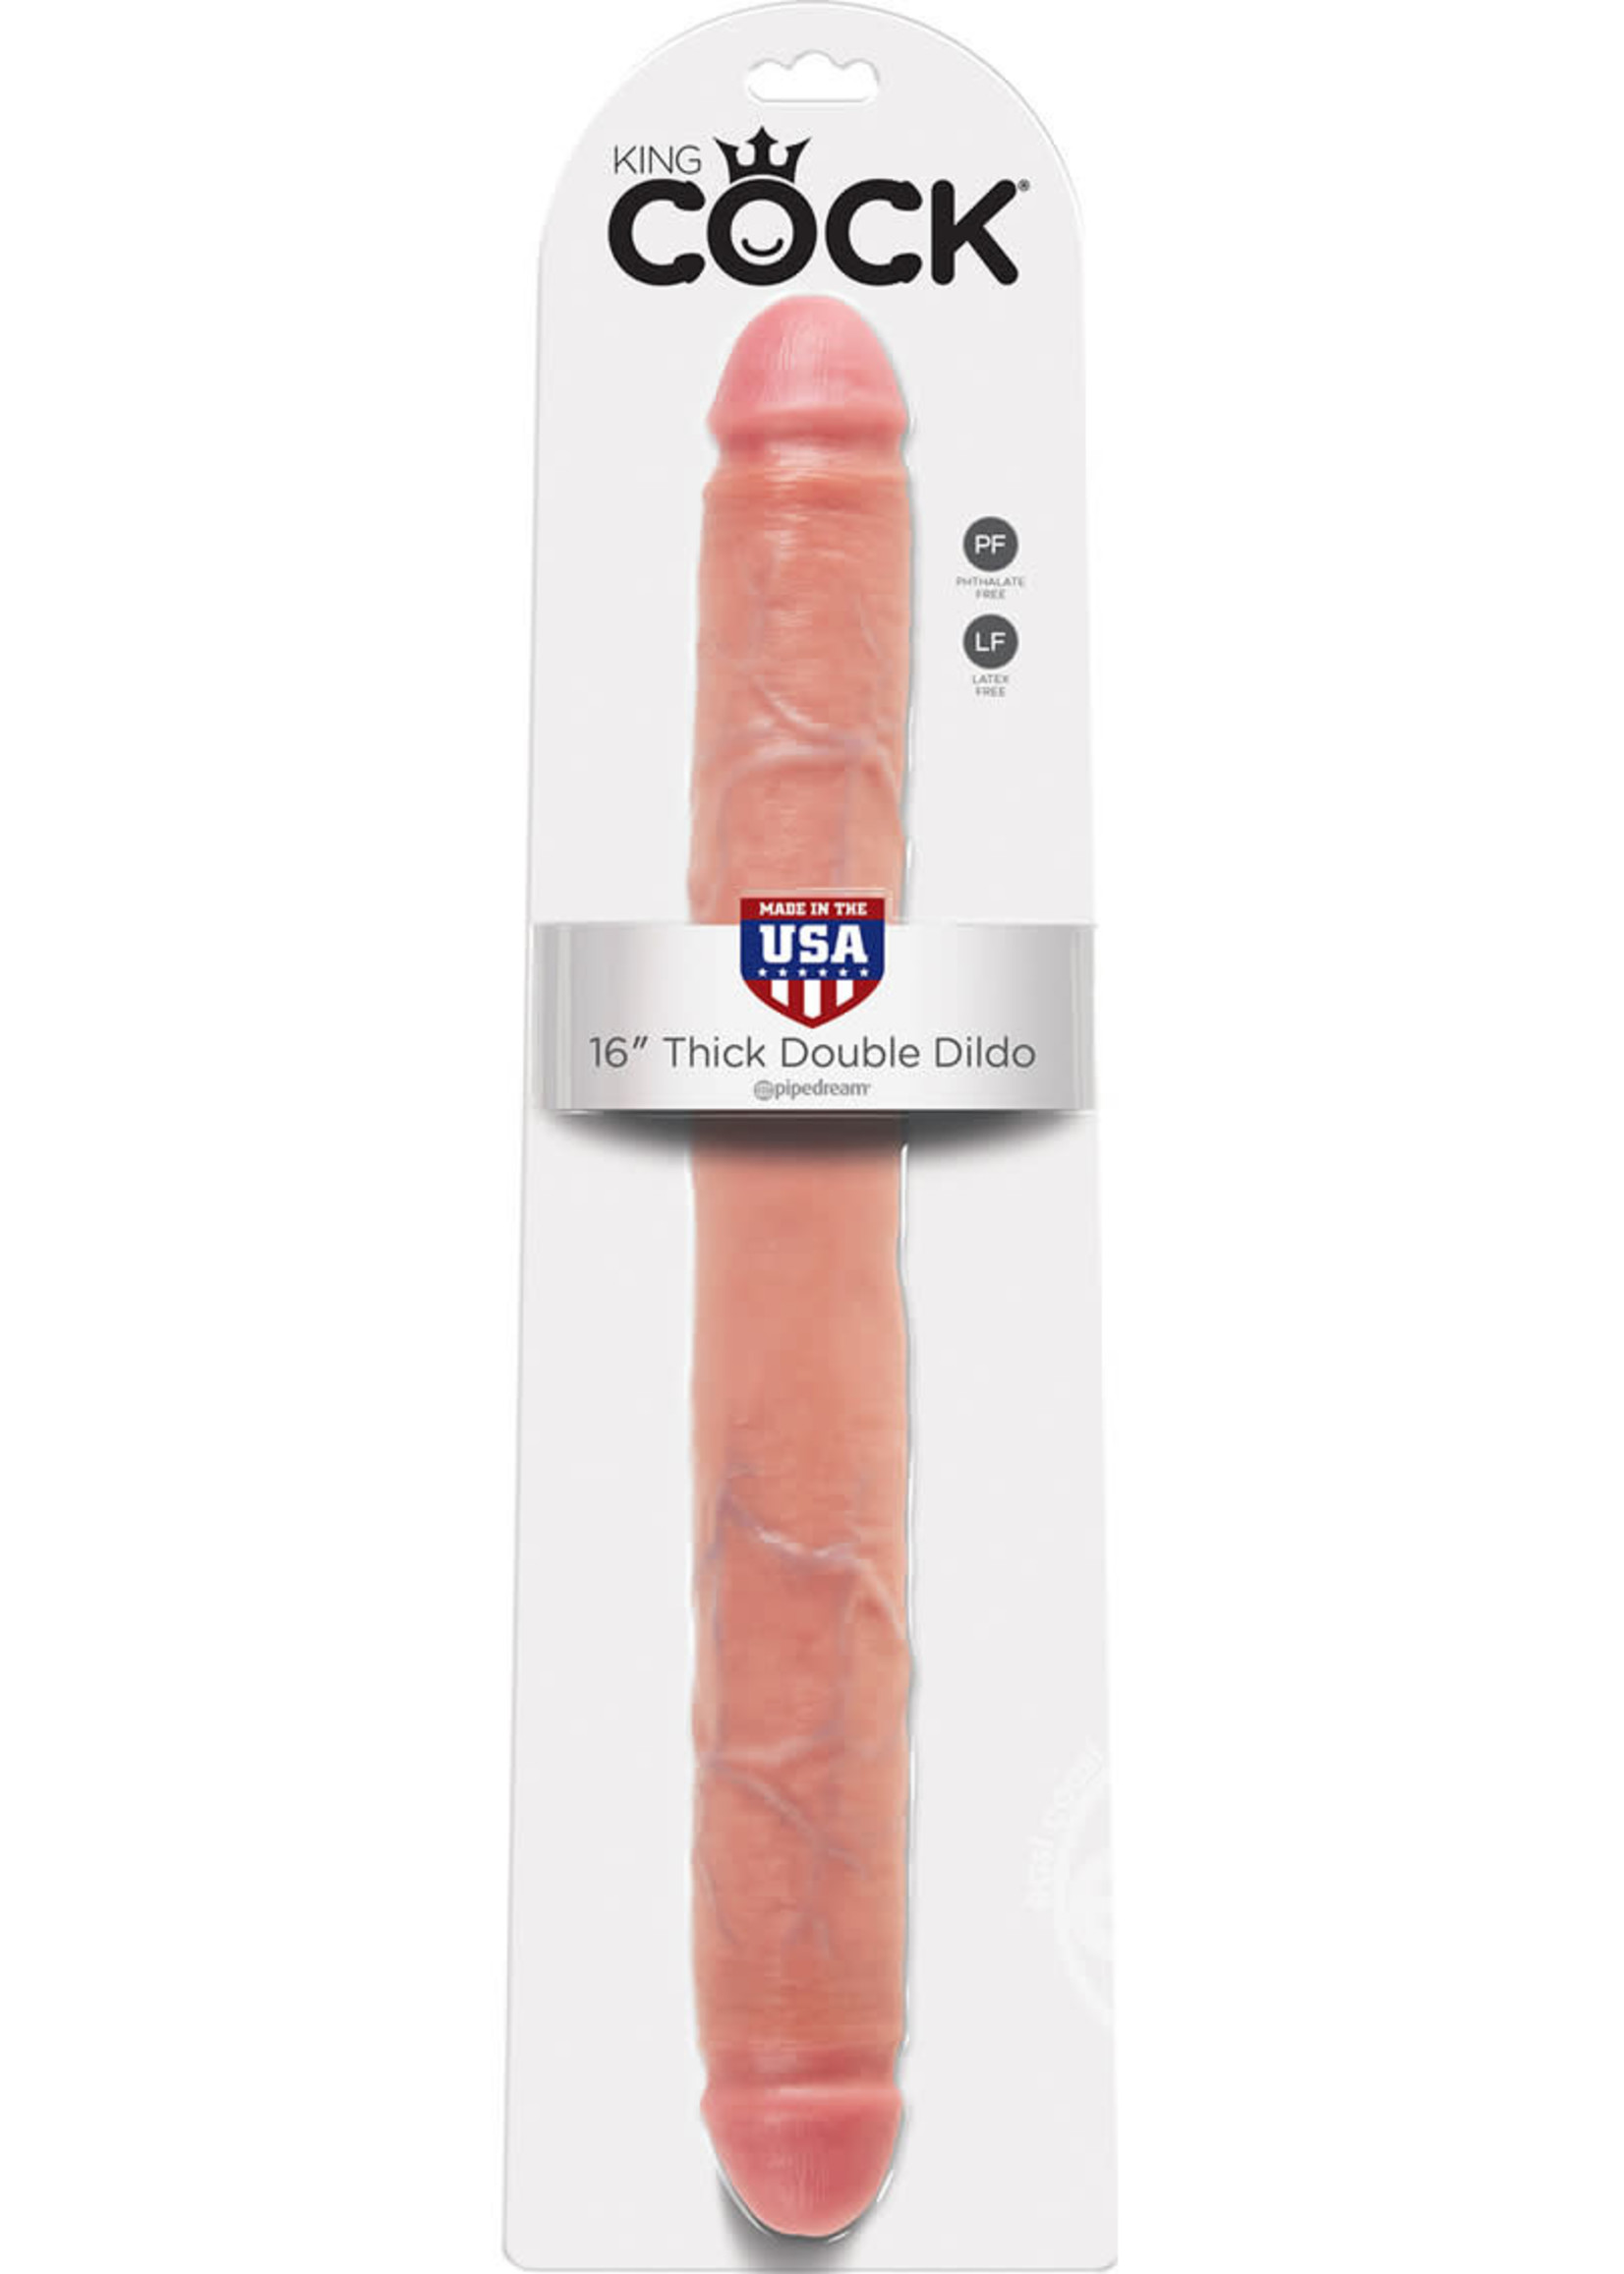 King Cock King Cock Thick Double Dildo 16in - Vanilla